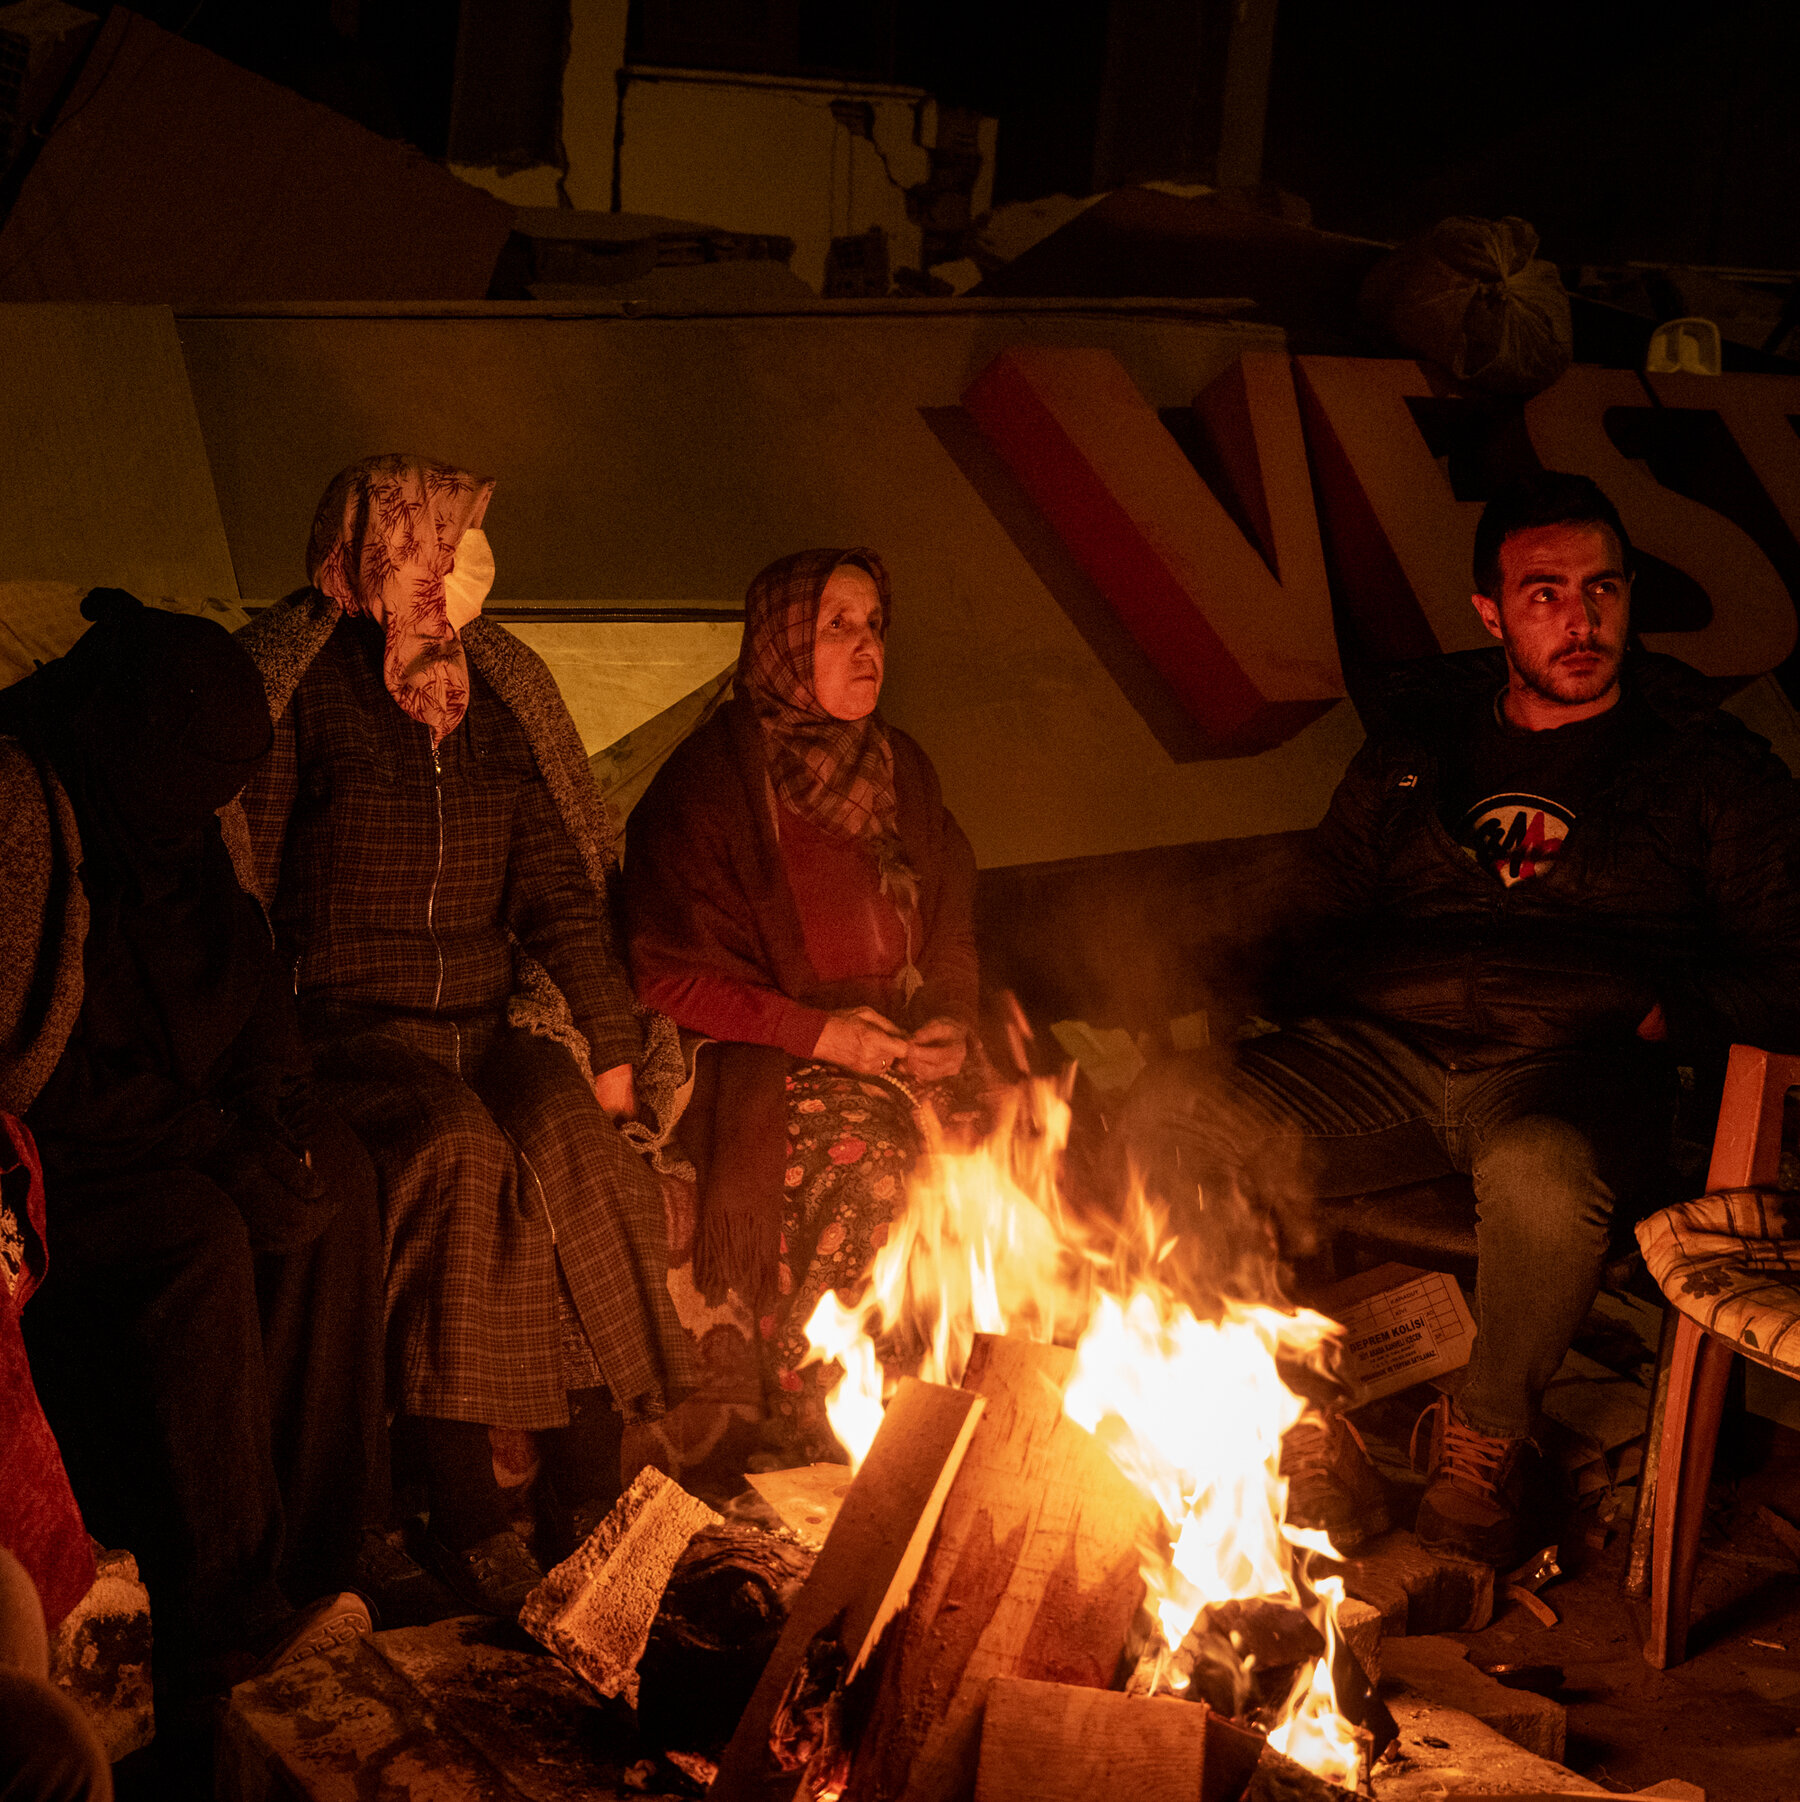 Six people sitting around a fire.